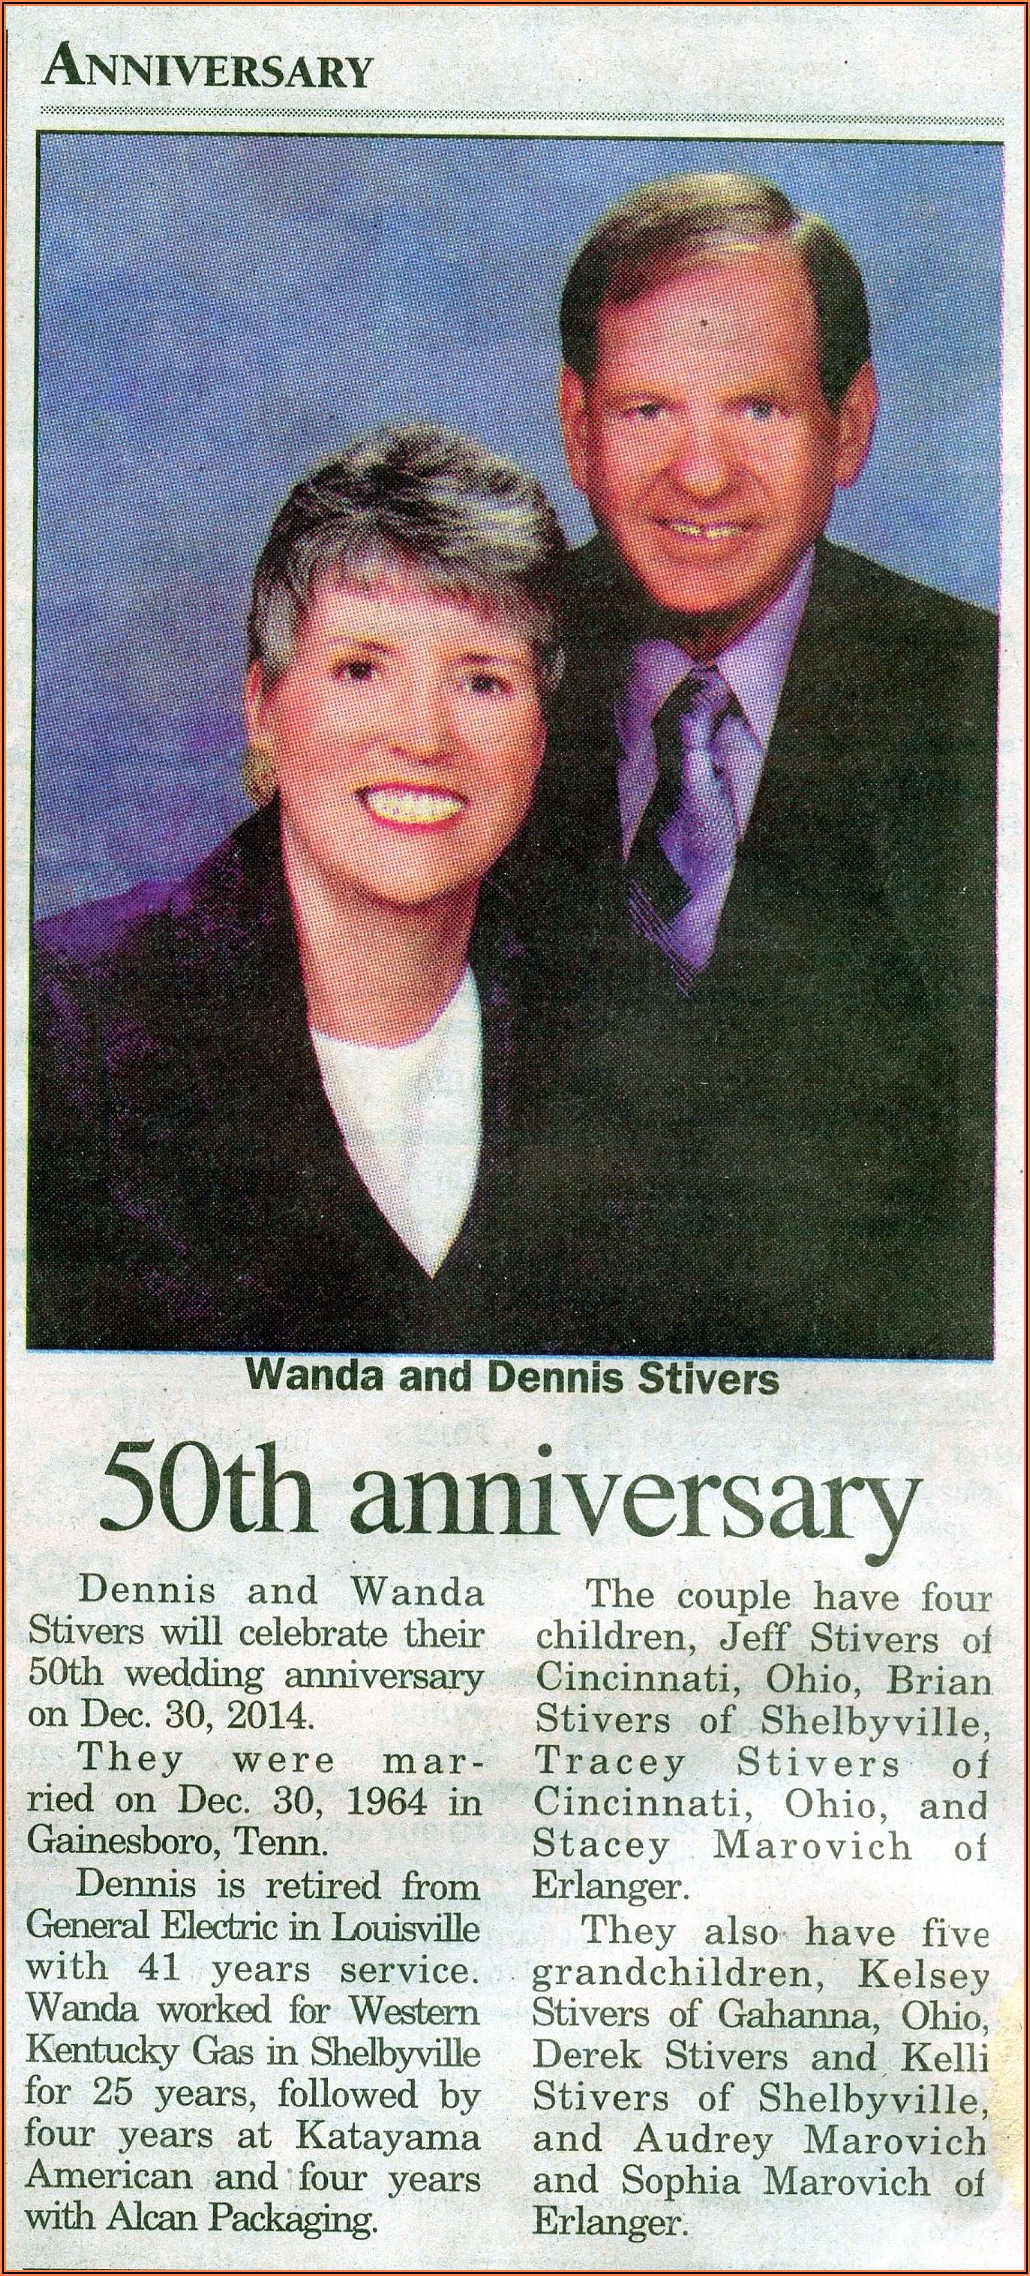 50th Wedding Anniversary Announcement Wording For Newspaper